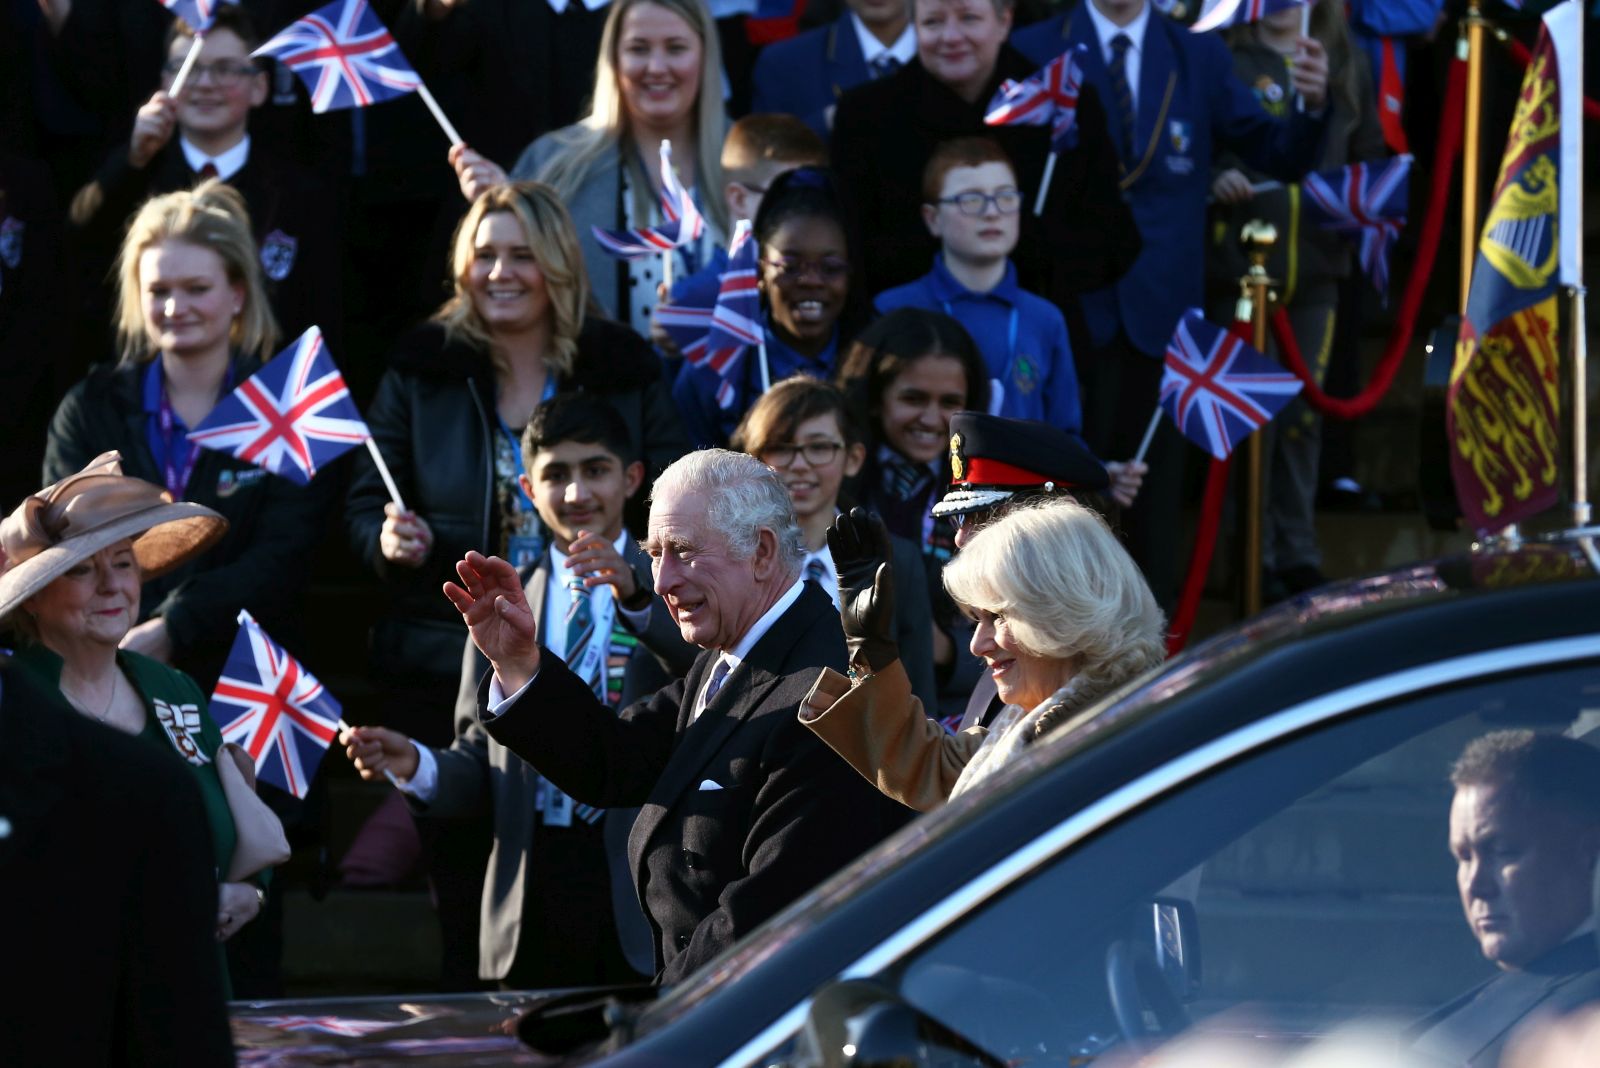 epa10418057 Britain's King Charles III (L) and Camilla, The Queen Consort (R) wave as they arrive at Bolton Town Hall in Bolton, Britain, 20 January 2023. The royal couple will meet representatives from the community in Bolton including Bolton Asian Elders, Bolton’s Polish community and the Association of Ukrainians in Great Britain.  EPA/ADAM VAUGHAN